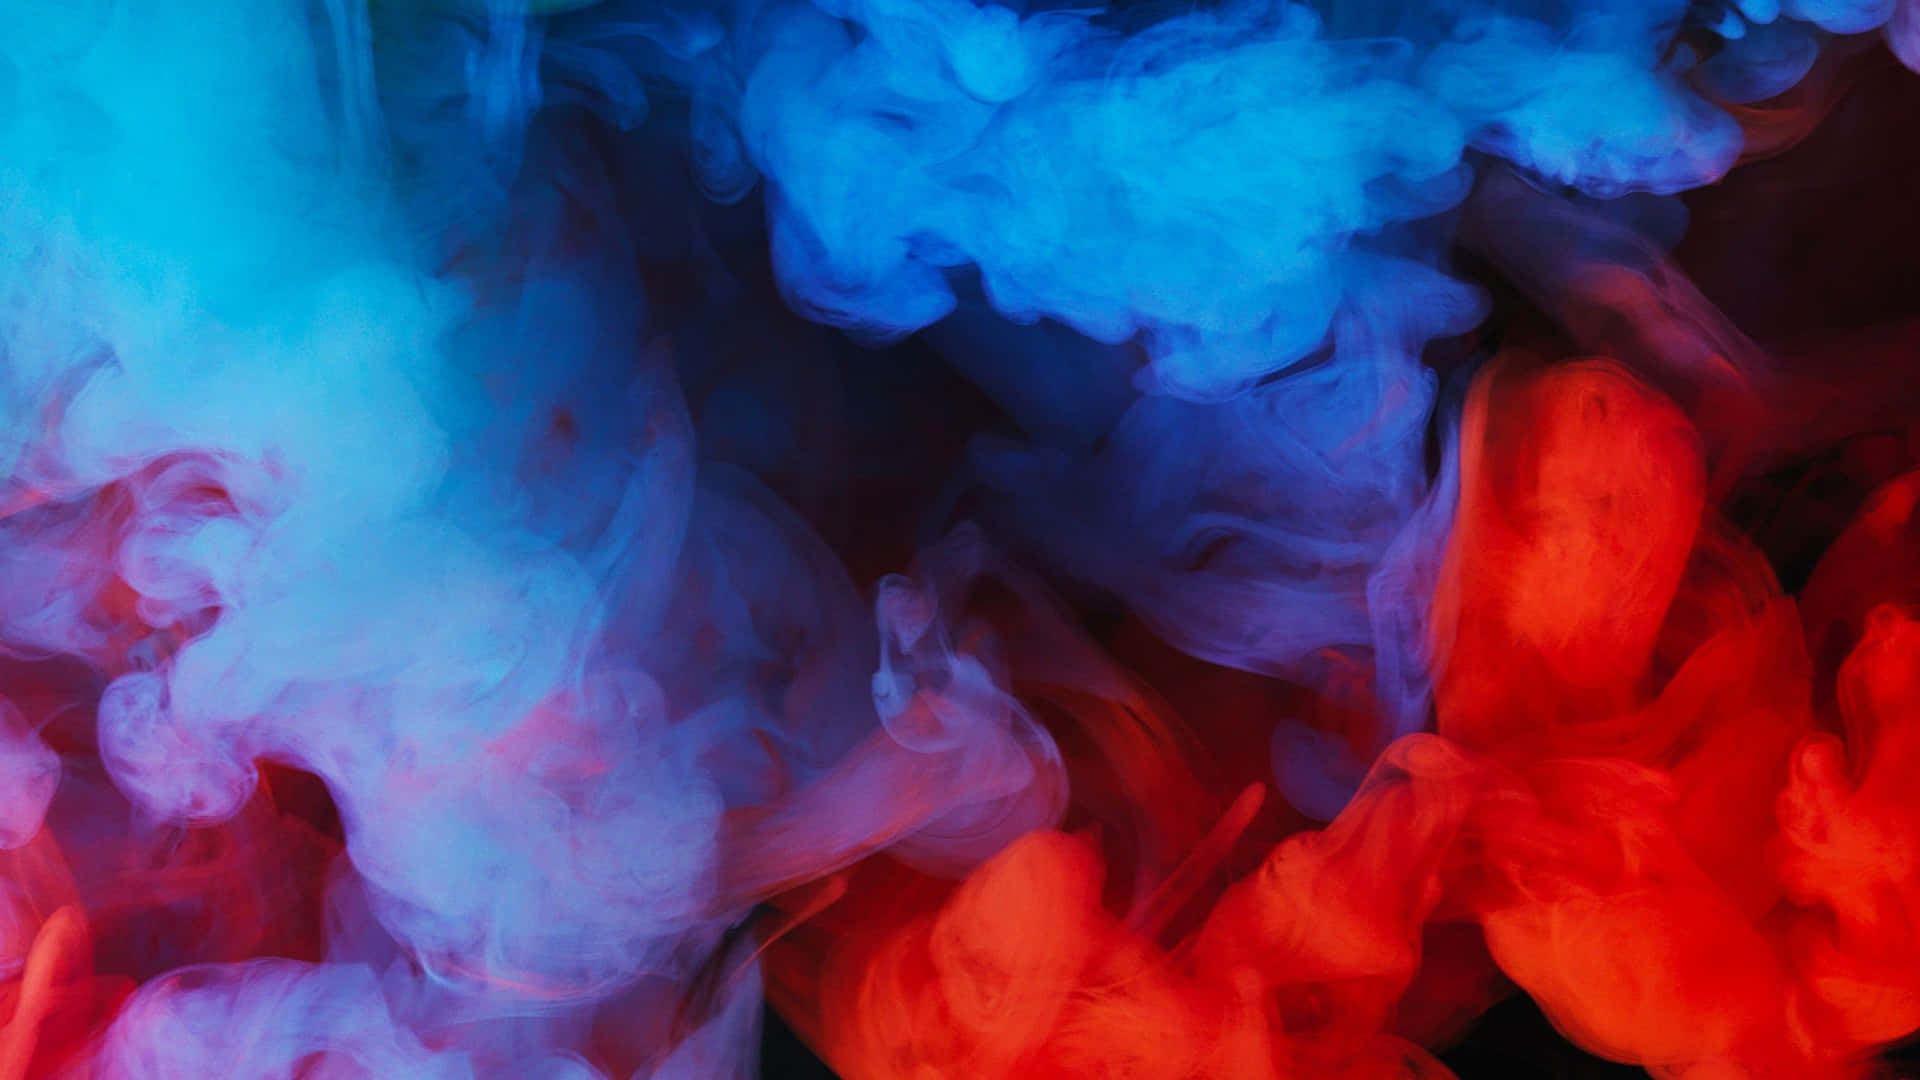 A Blue, Red And Blue Smoke Is Floating In The Air